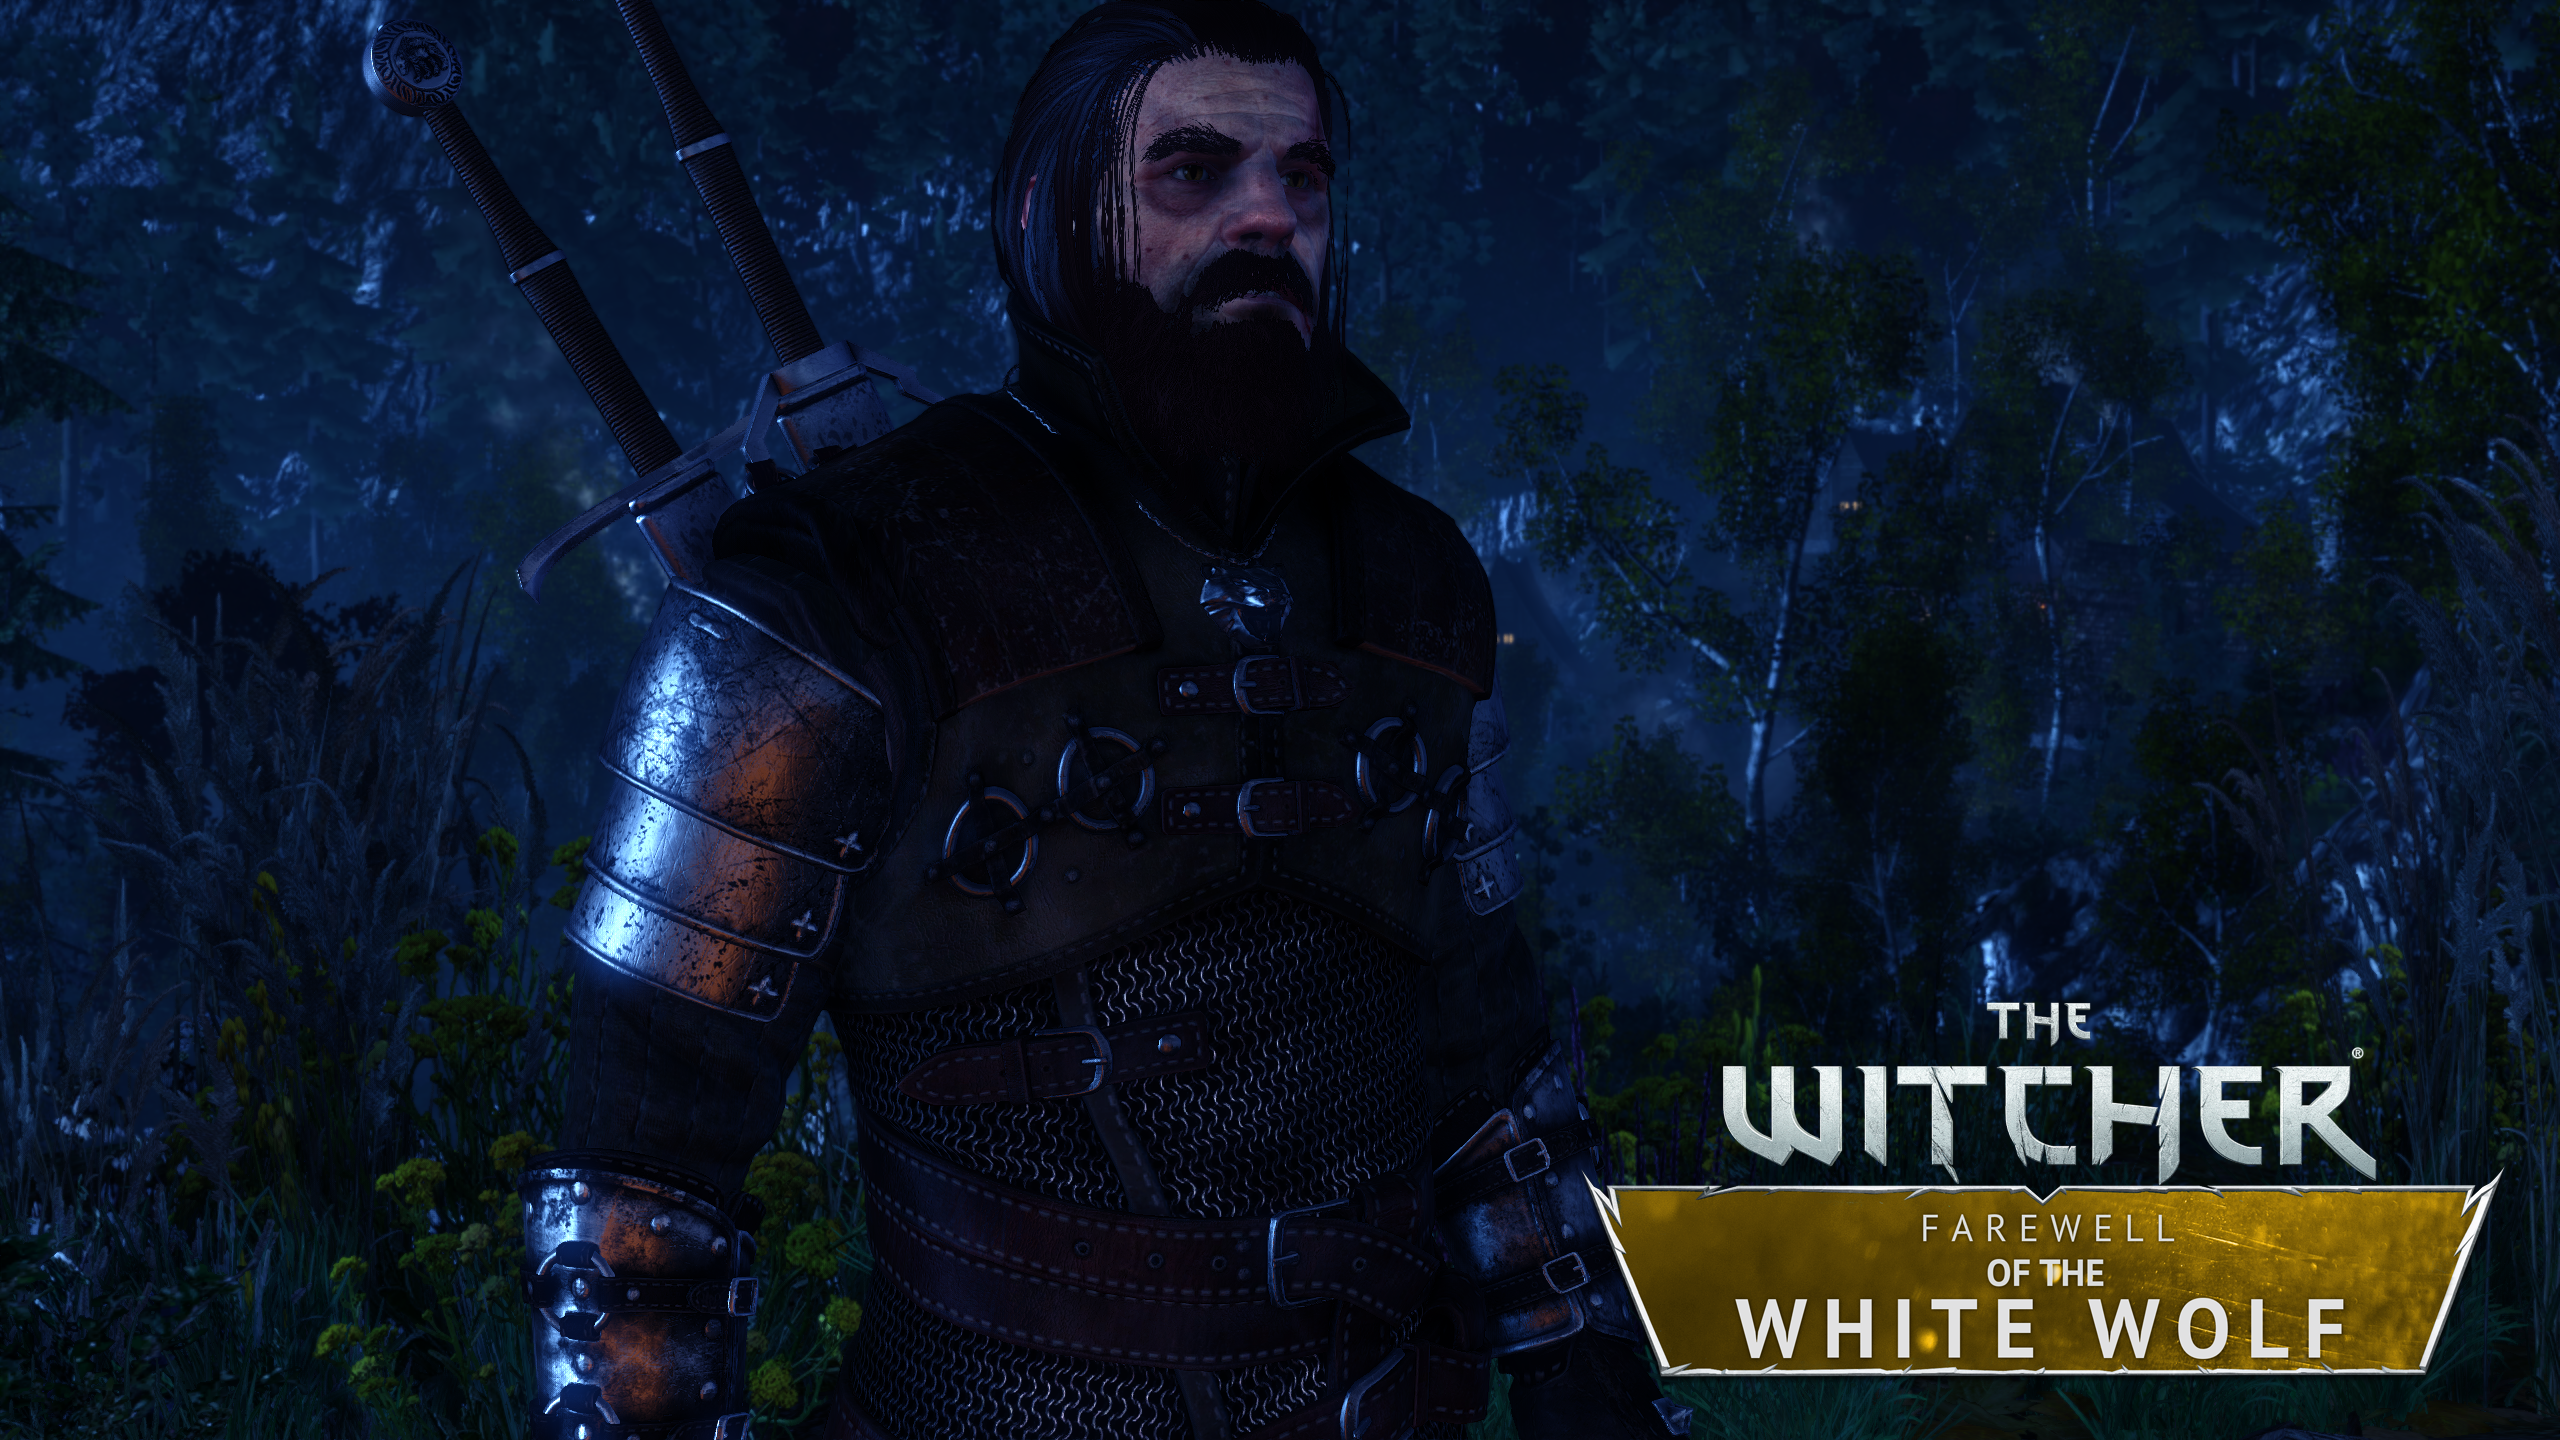 Farewell of the White Wolf mod for The Witcher 2: Assassins of Kings - ModDB